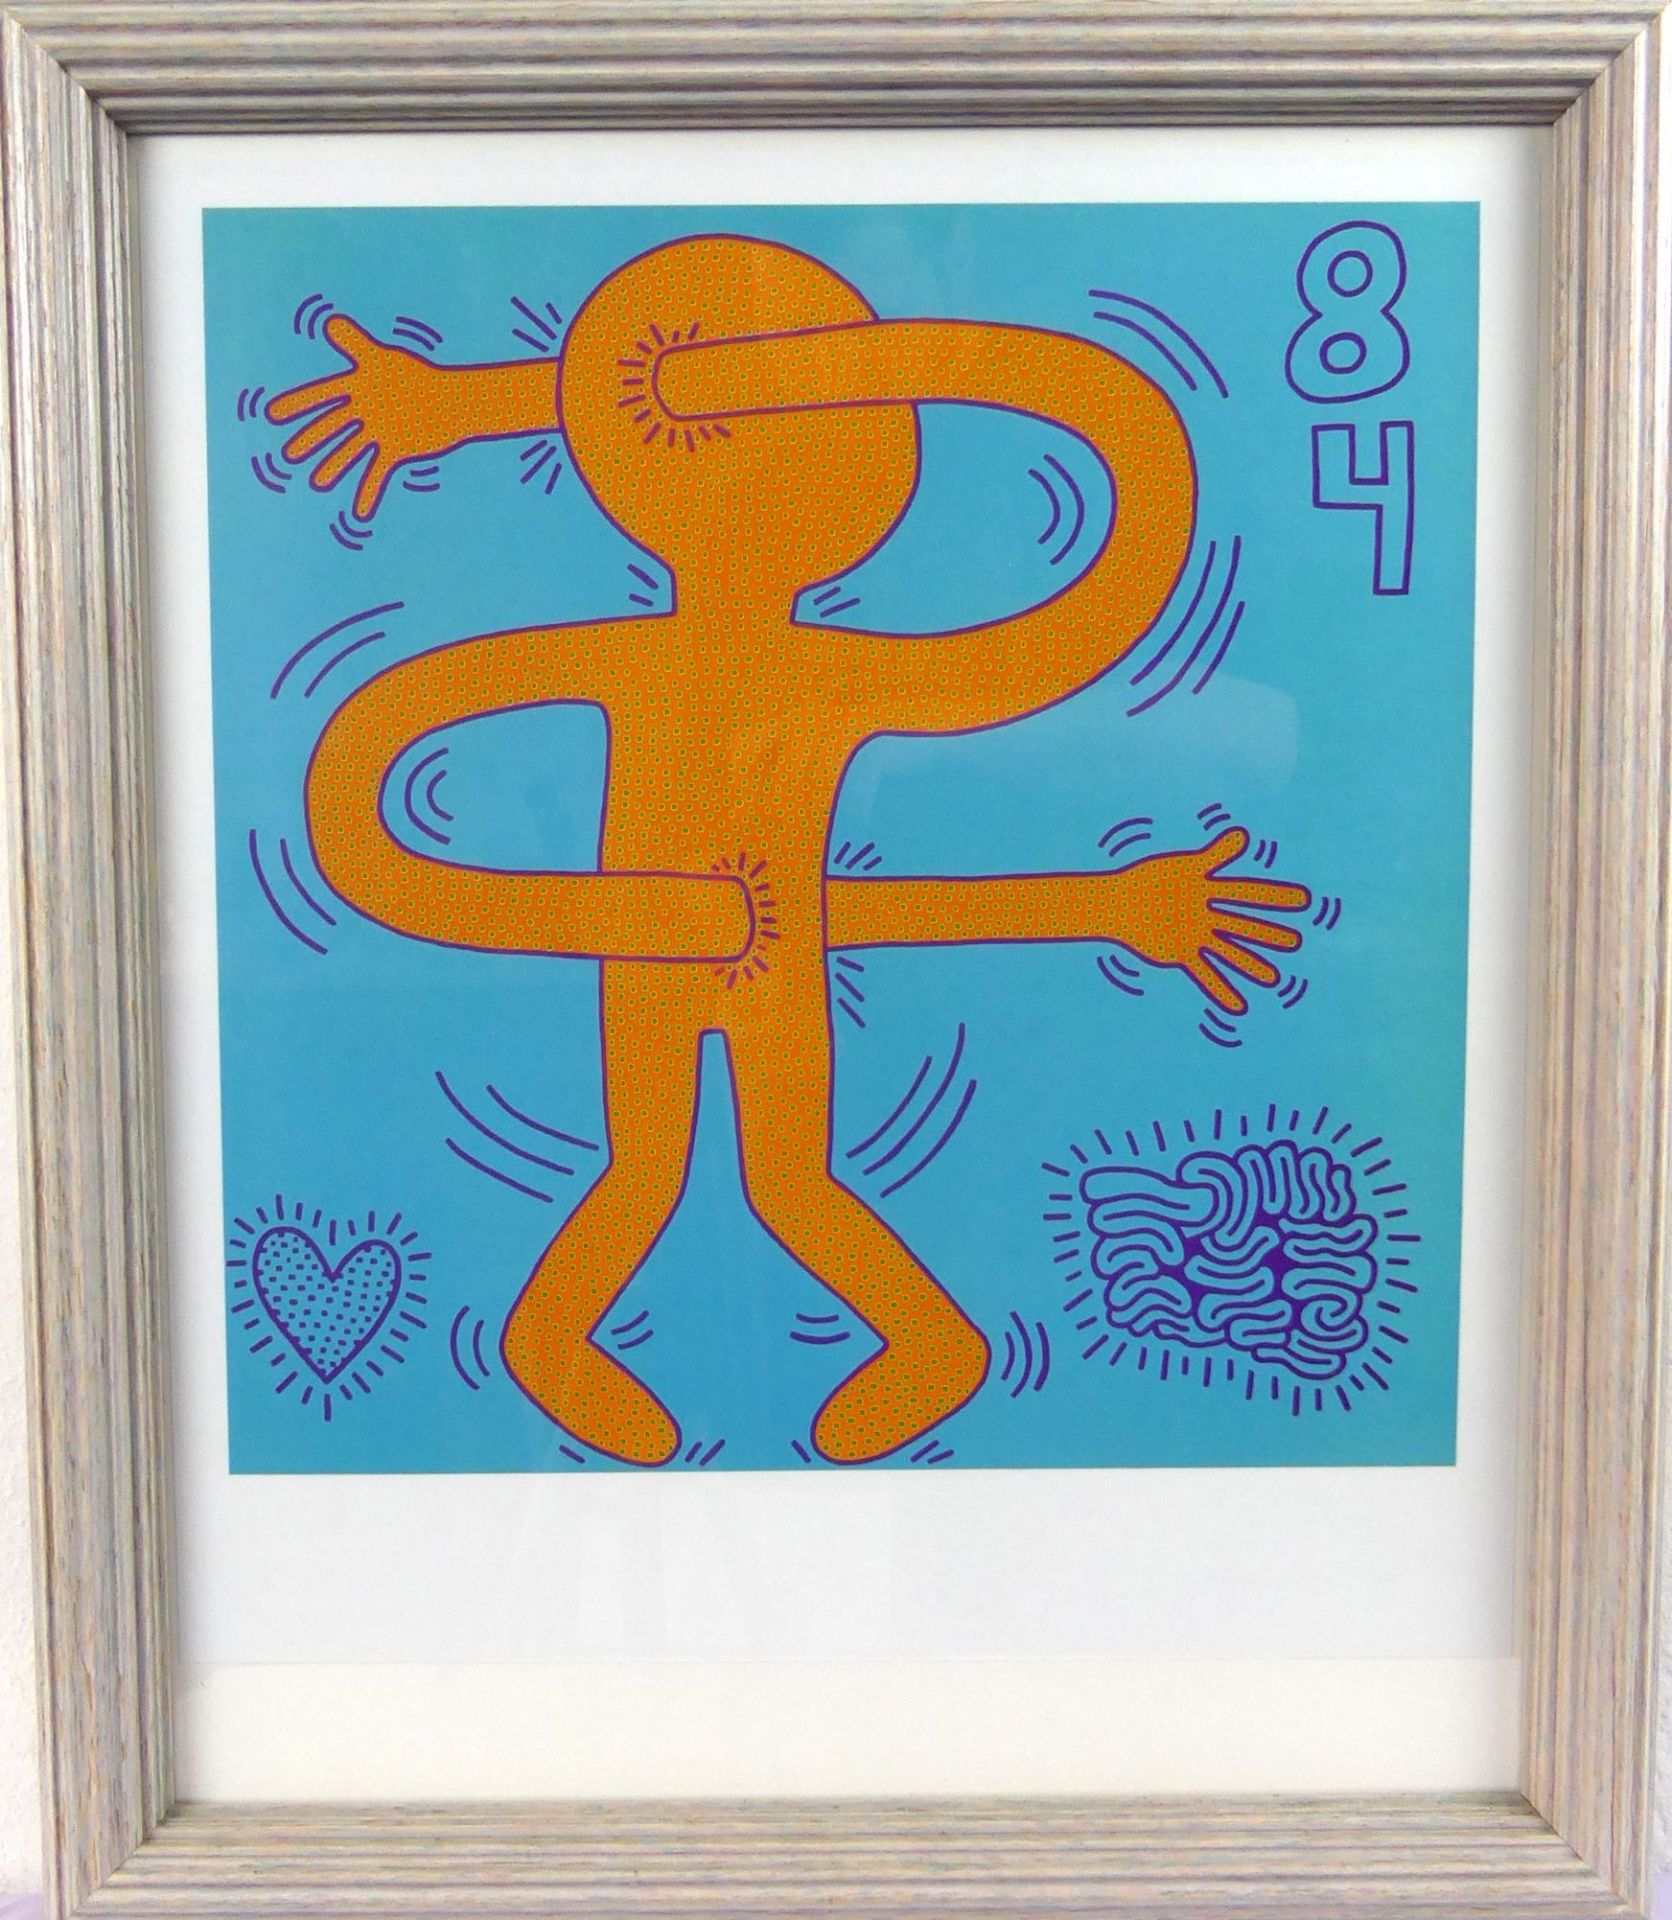 KEITH HARING (1958-1990), "84", Farboffsetlithographie,